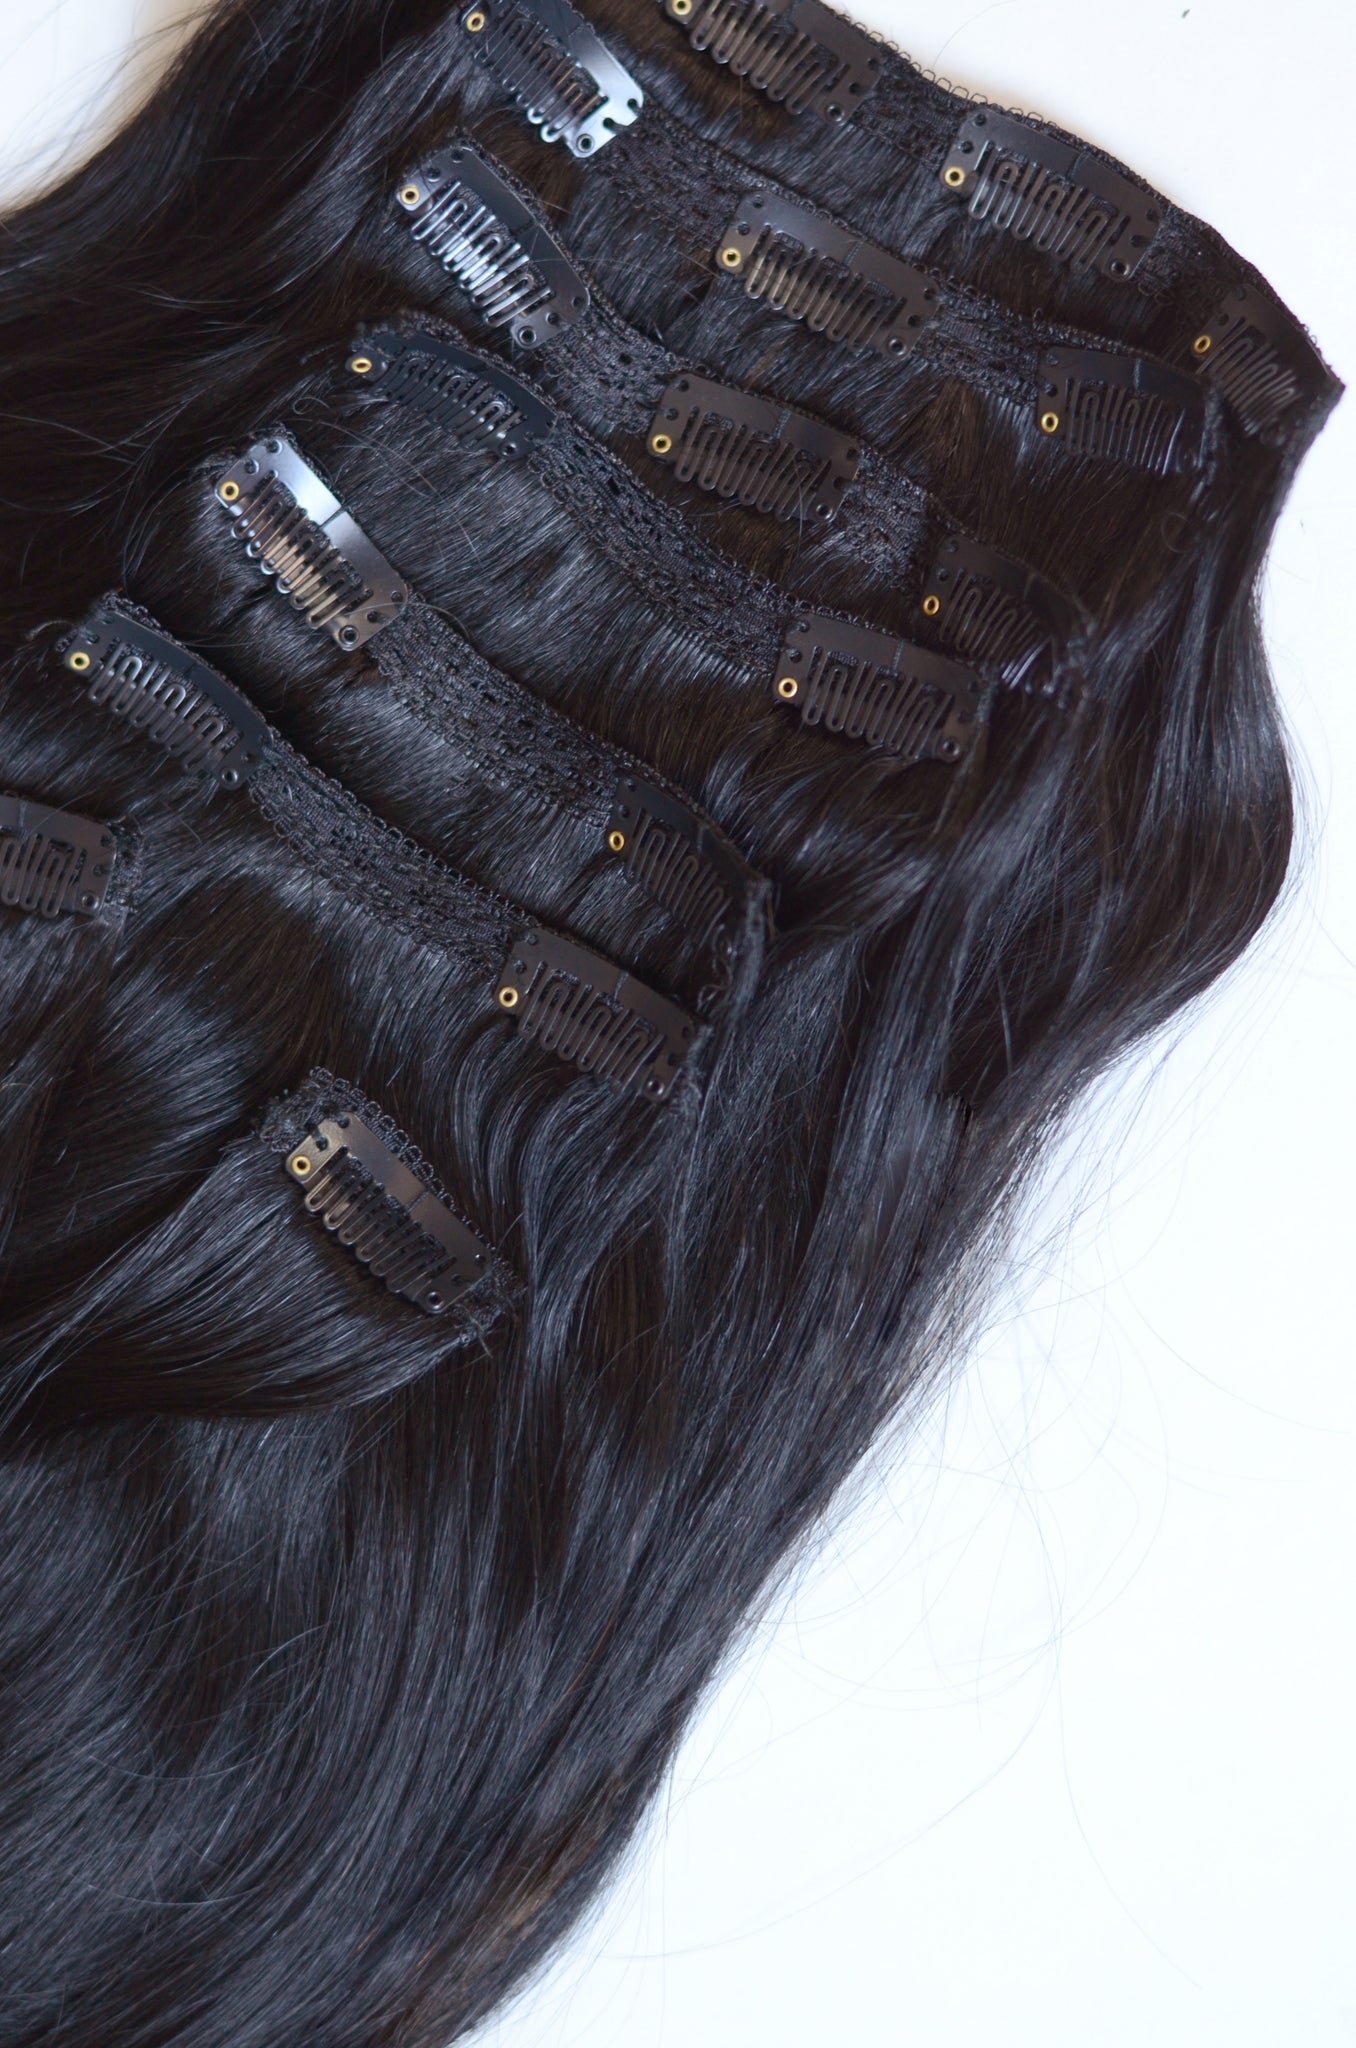 Onyx Clip In Hair Extensions 20 Inches 200 Gram Full Head Set Of